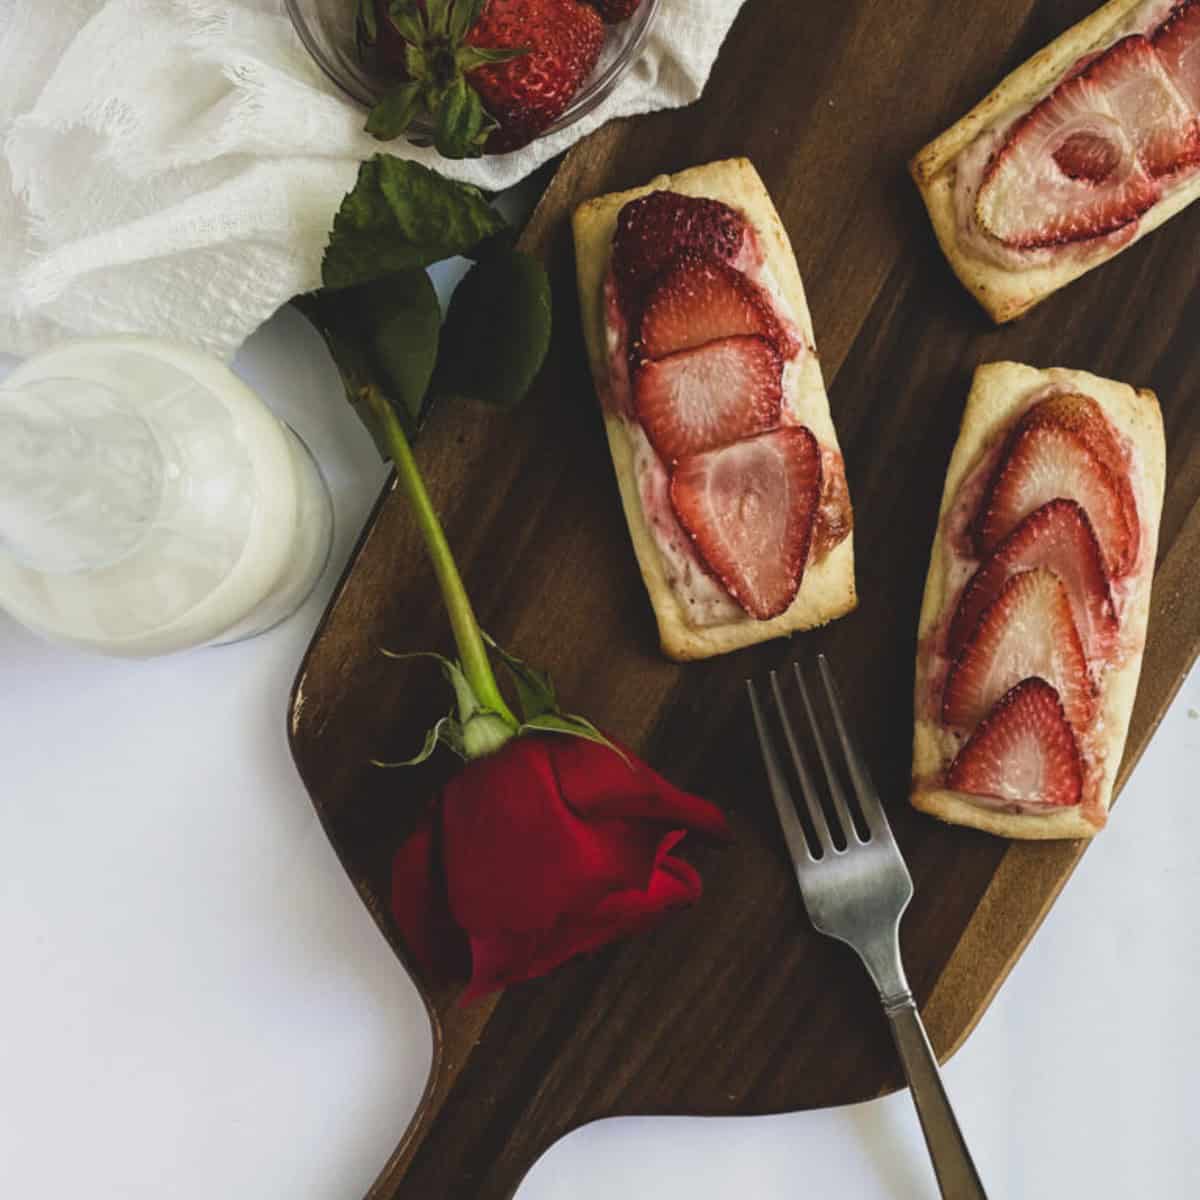 strawberries and cream puff pastry with sliced strawberries on a wooden cutting board with a fork and a rose